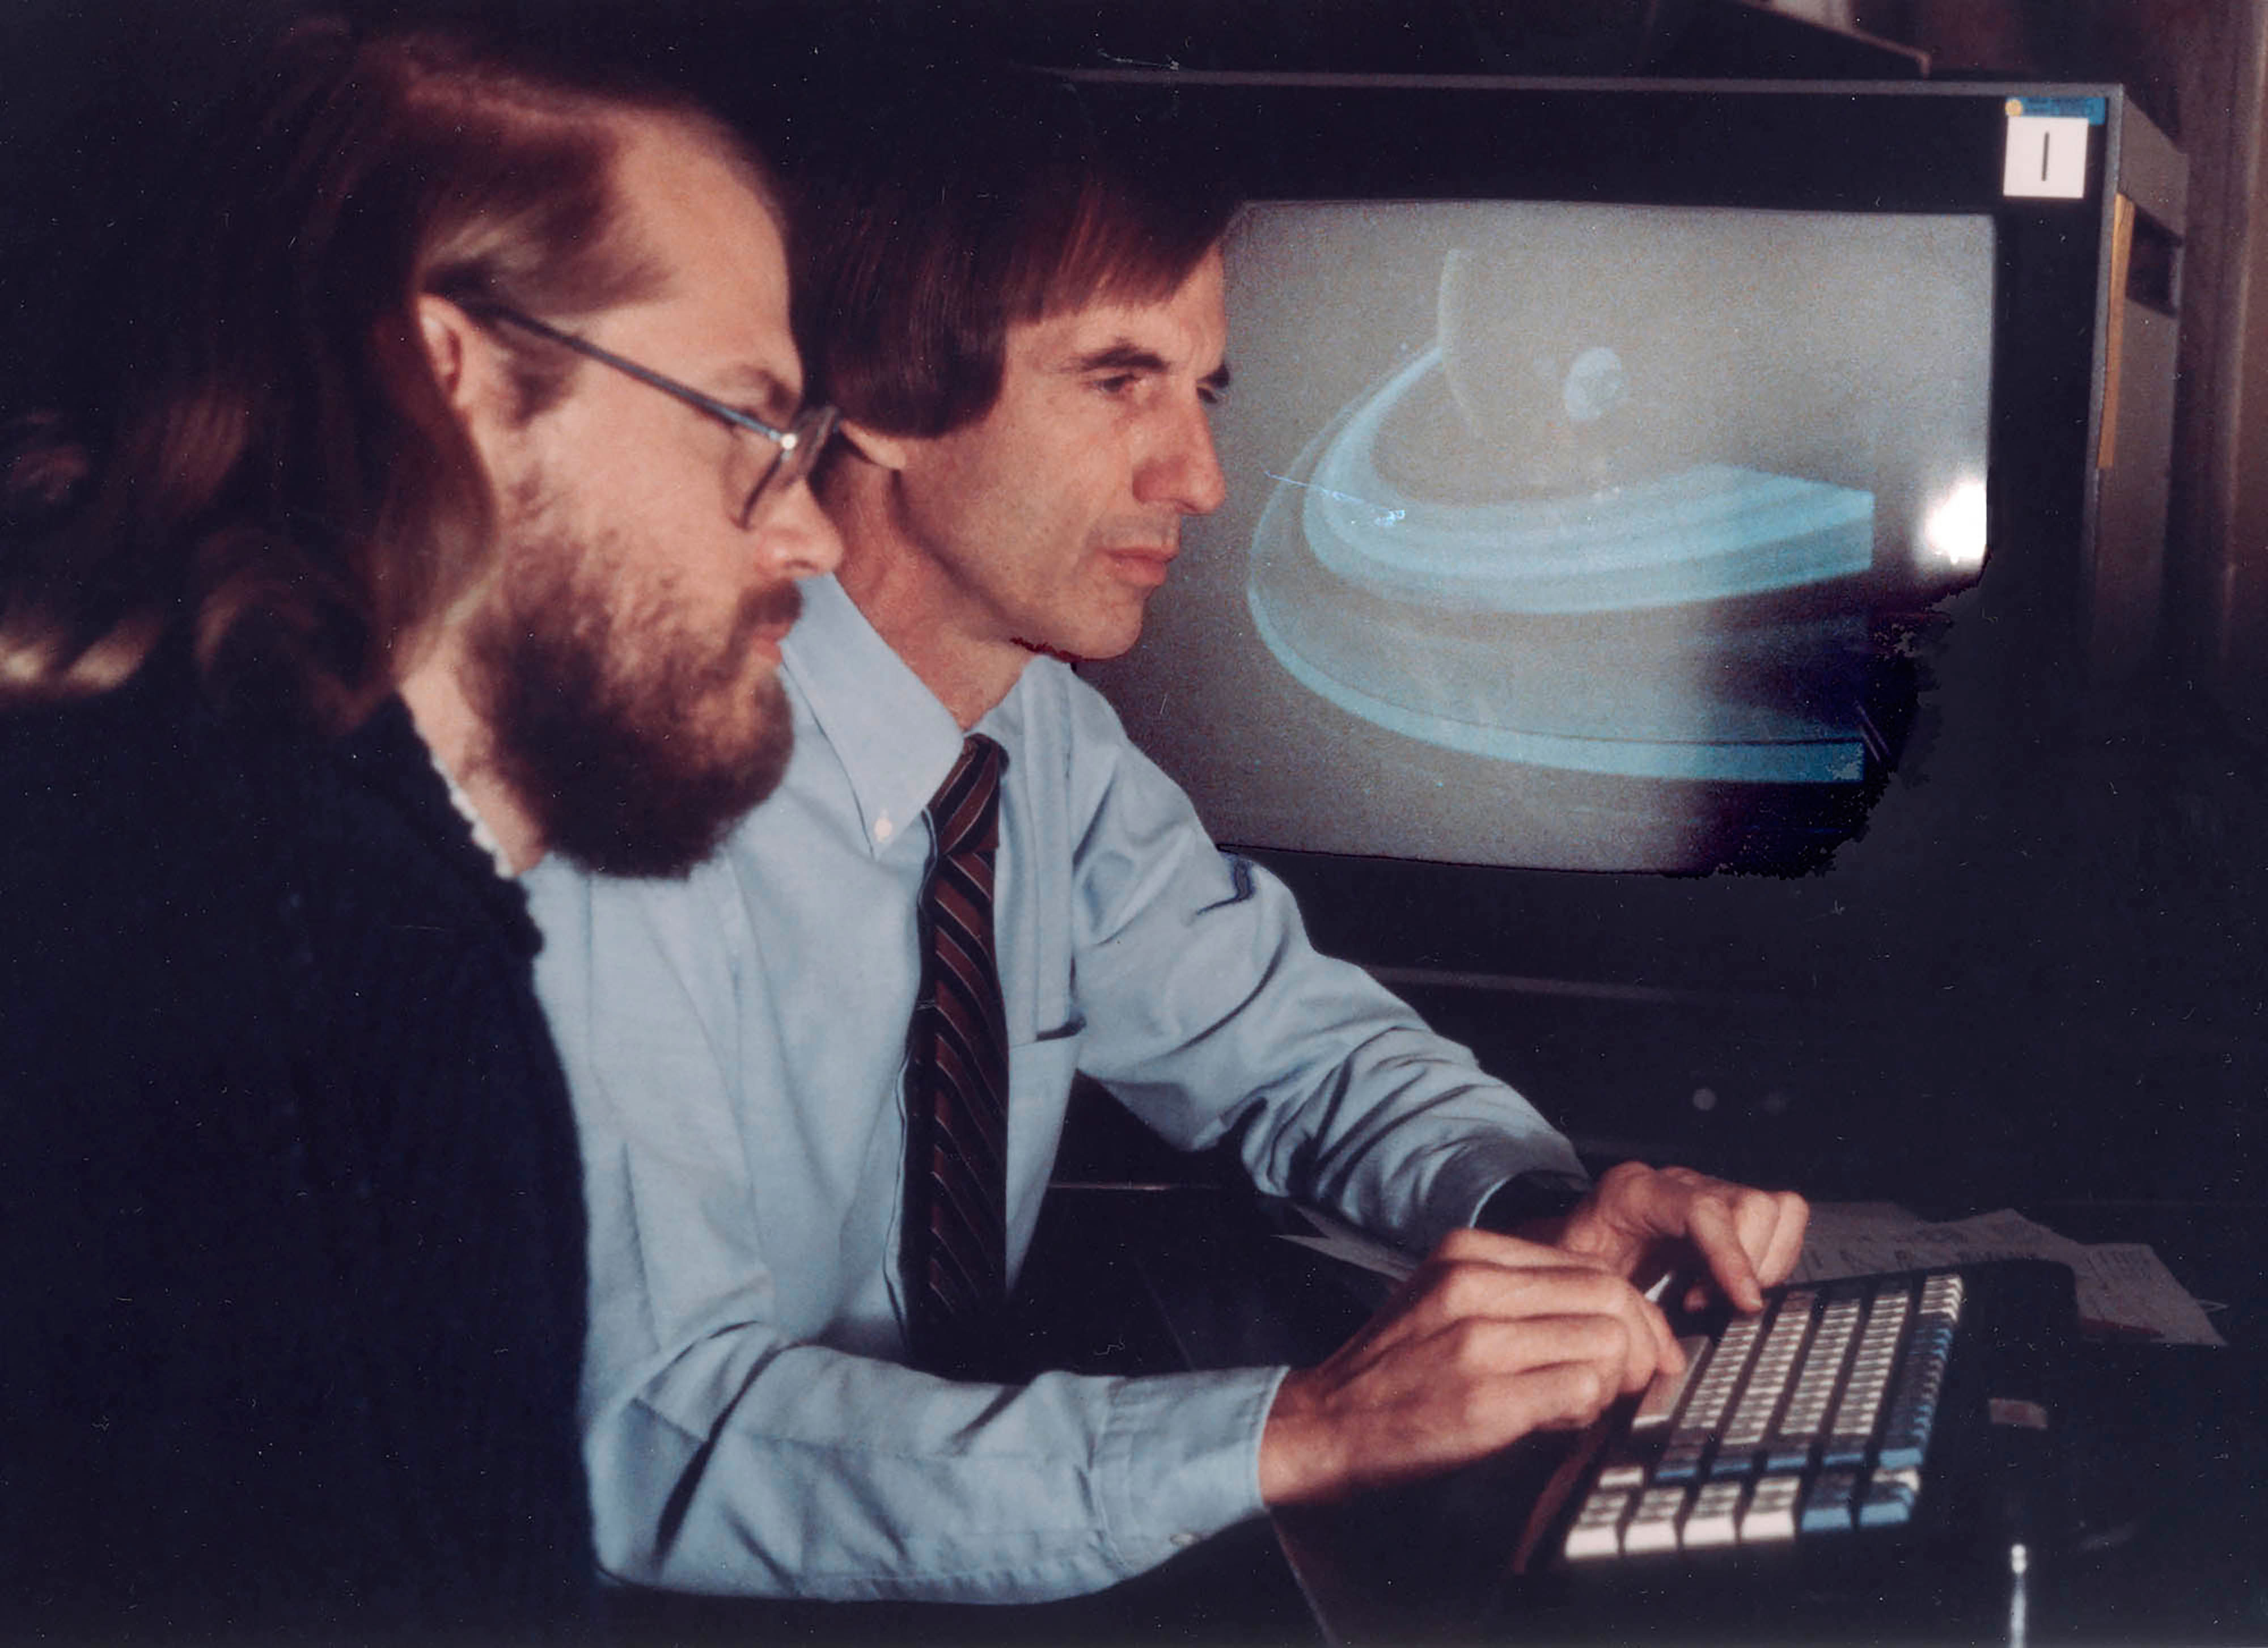 James Blinn (far left) and Charles Kohlhase working at JPL on the revolutionary computer animations of the planned Voyager encounters with the outer planets. Credit: Charles Kohlhase